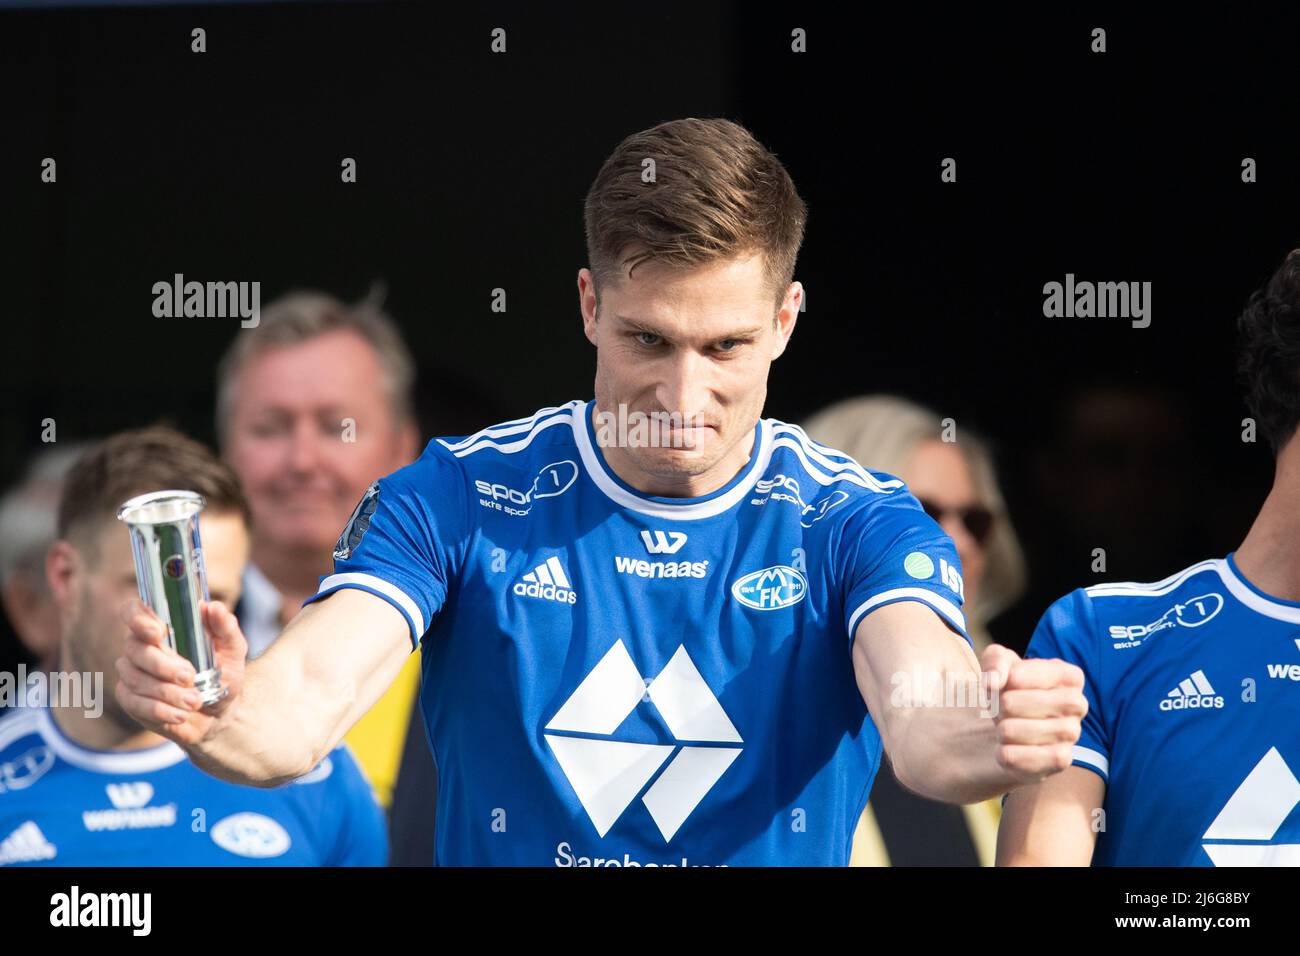 Oslo, Norway. 01st, May 2022. Kristoffer Haugen of Molde is celebrating the victory after the Norwegian Cup final, the NM Menn final, between Bodoe/Glimt and Molde at Ullevaal Stadion in Oslo. (Photo credit: Gonzales Photo - Jan-Erik Eriksen). Credit: Gonzales Photo/Alamy Live News Stock Photo